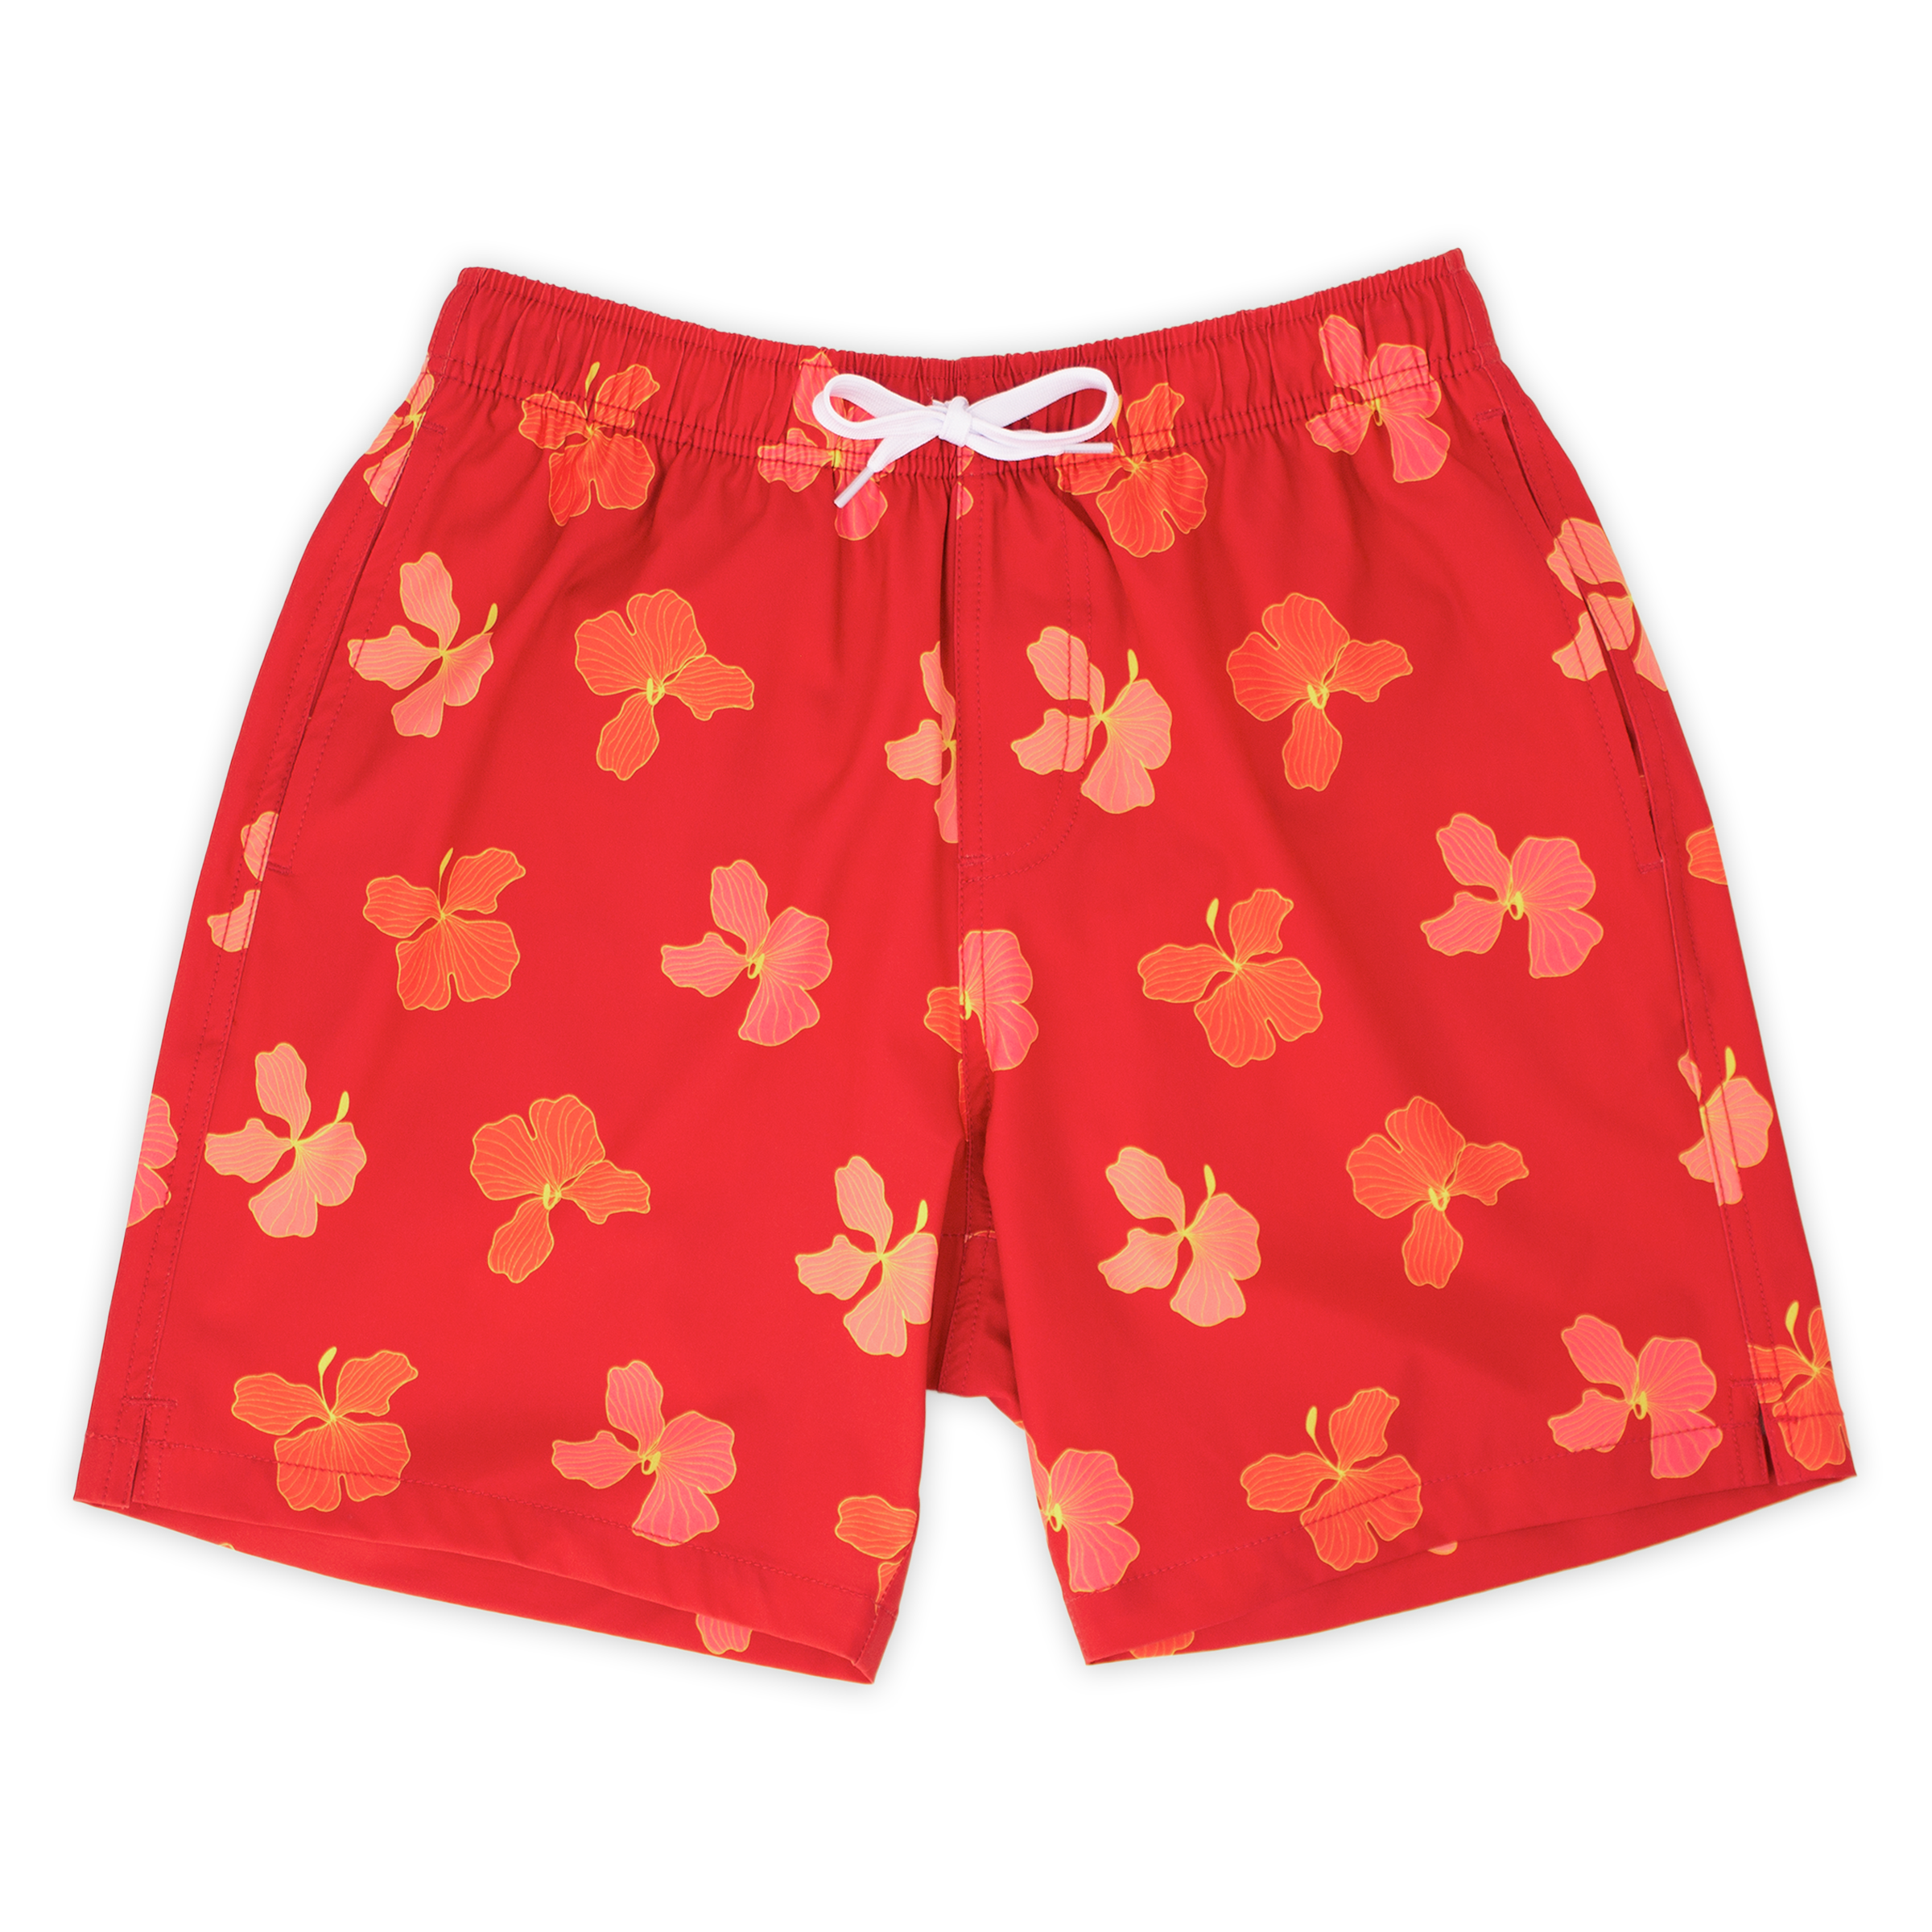 Stretch Swim 7" Hibiscus front, a bright red printed with pink and orange sketched hibiscus flowers with an elastic waistband, two inseam pockets, and a white drawstring